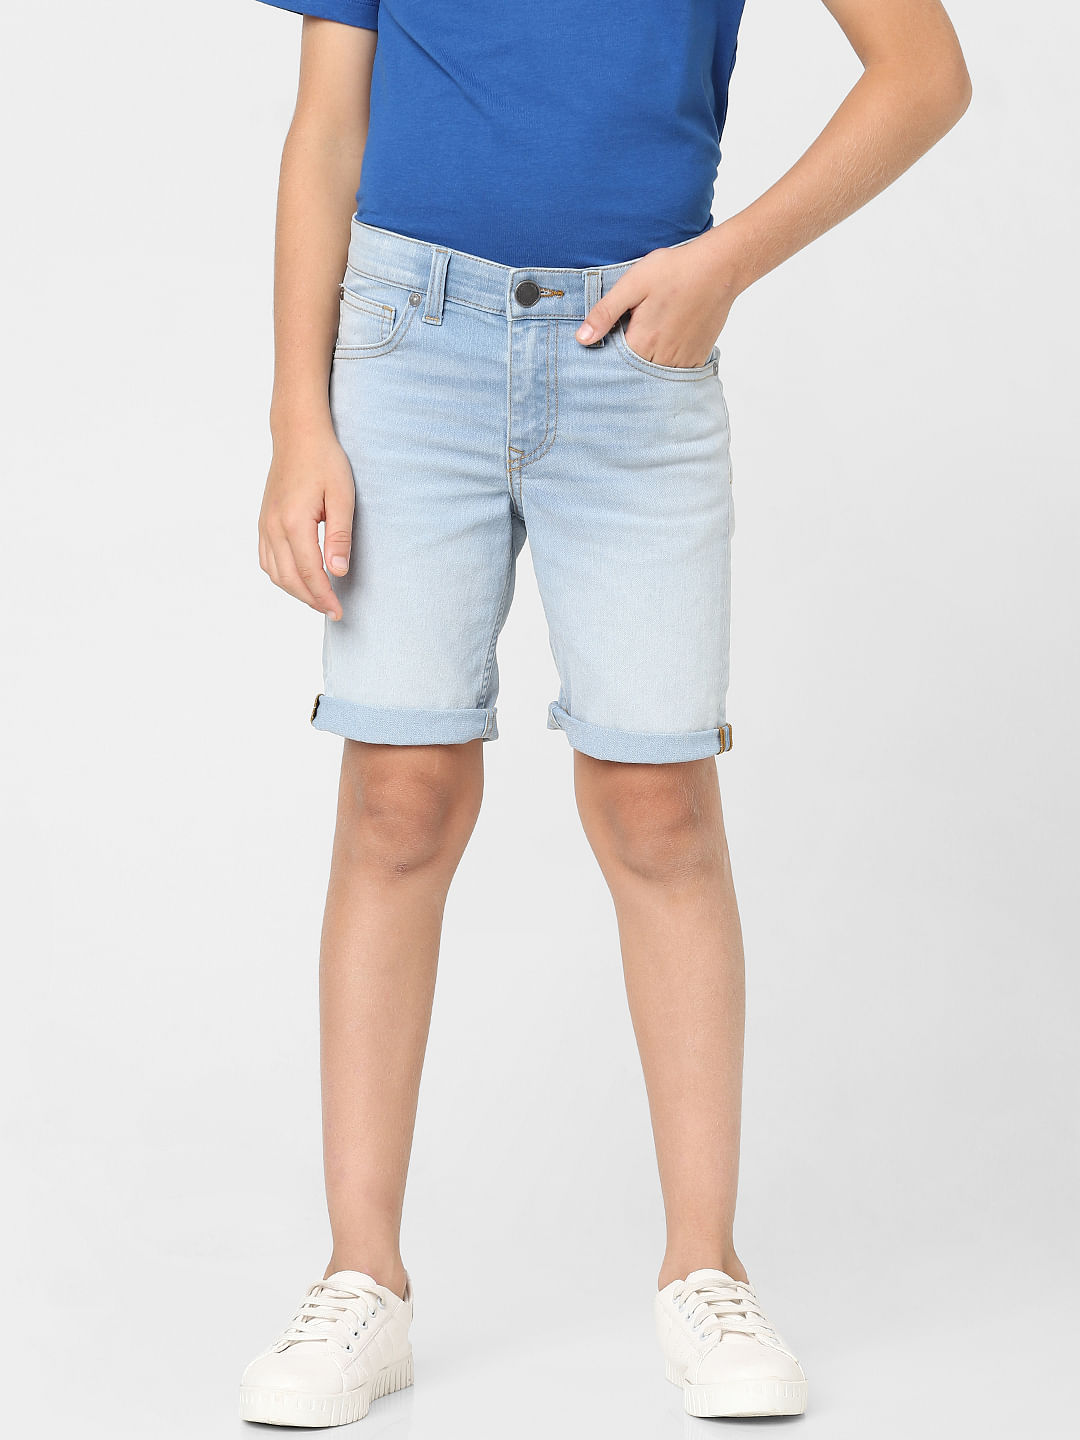 My Love Affair With Gap Denim Shorts: A Try-On Sesh - The Mom Edit